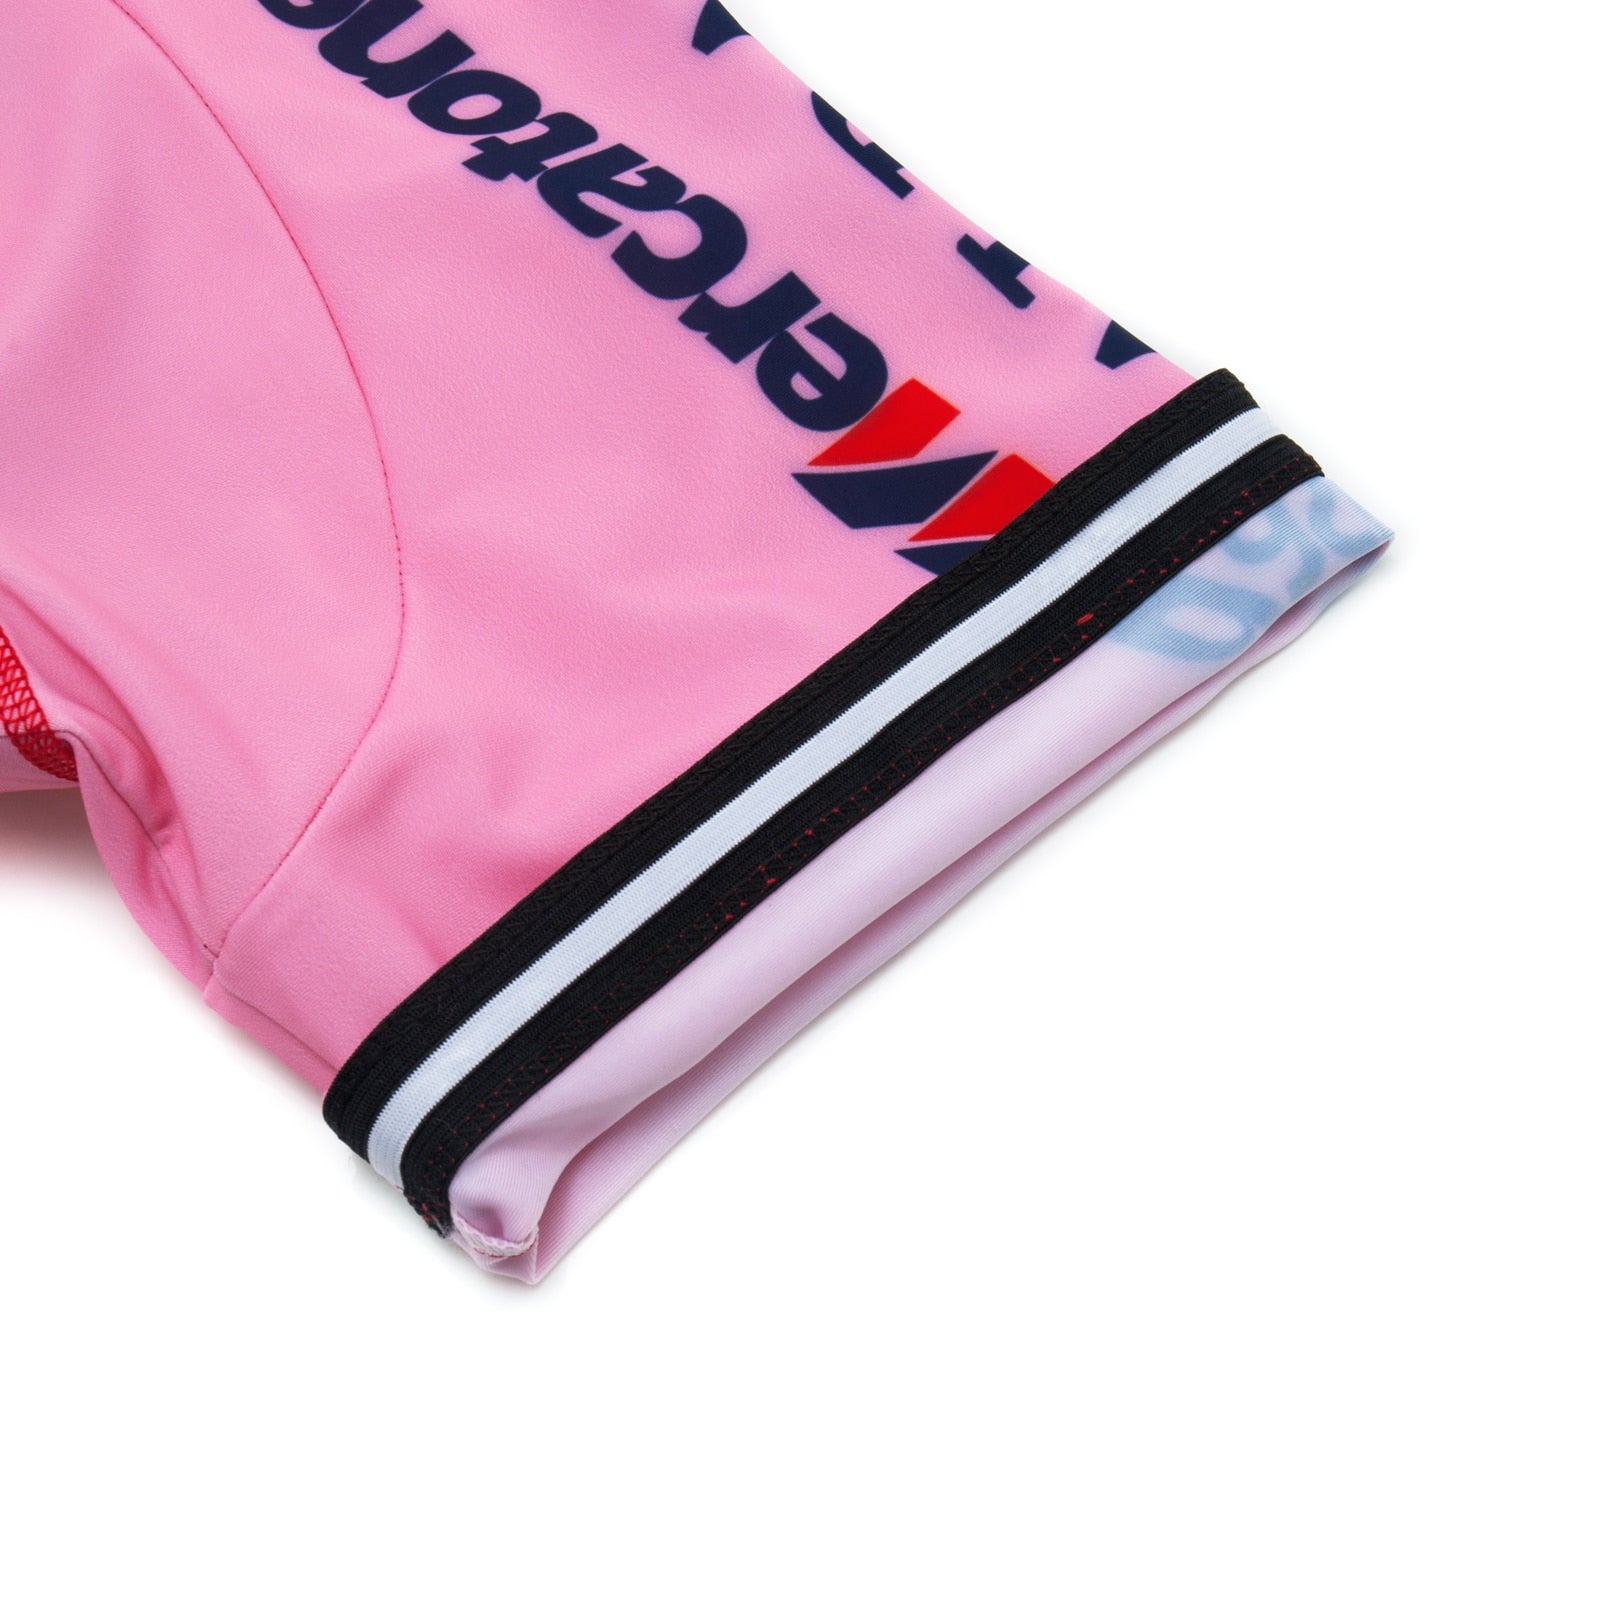 Marco Pink Retro Cycling Jersey Short sleeved suit